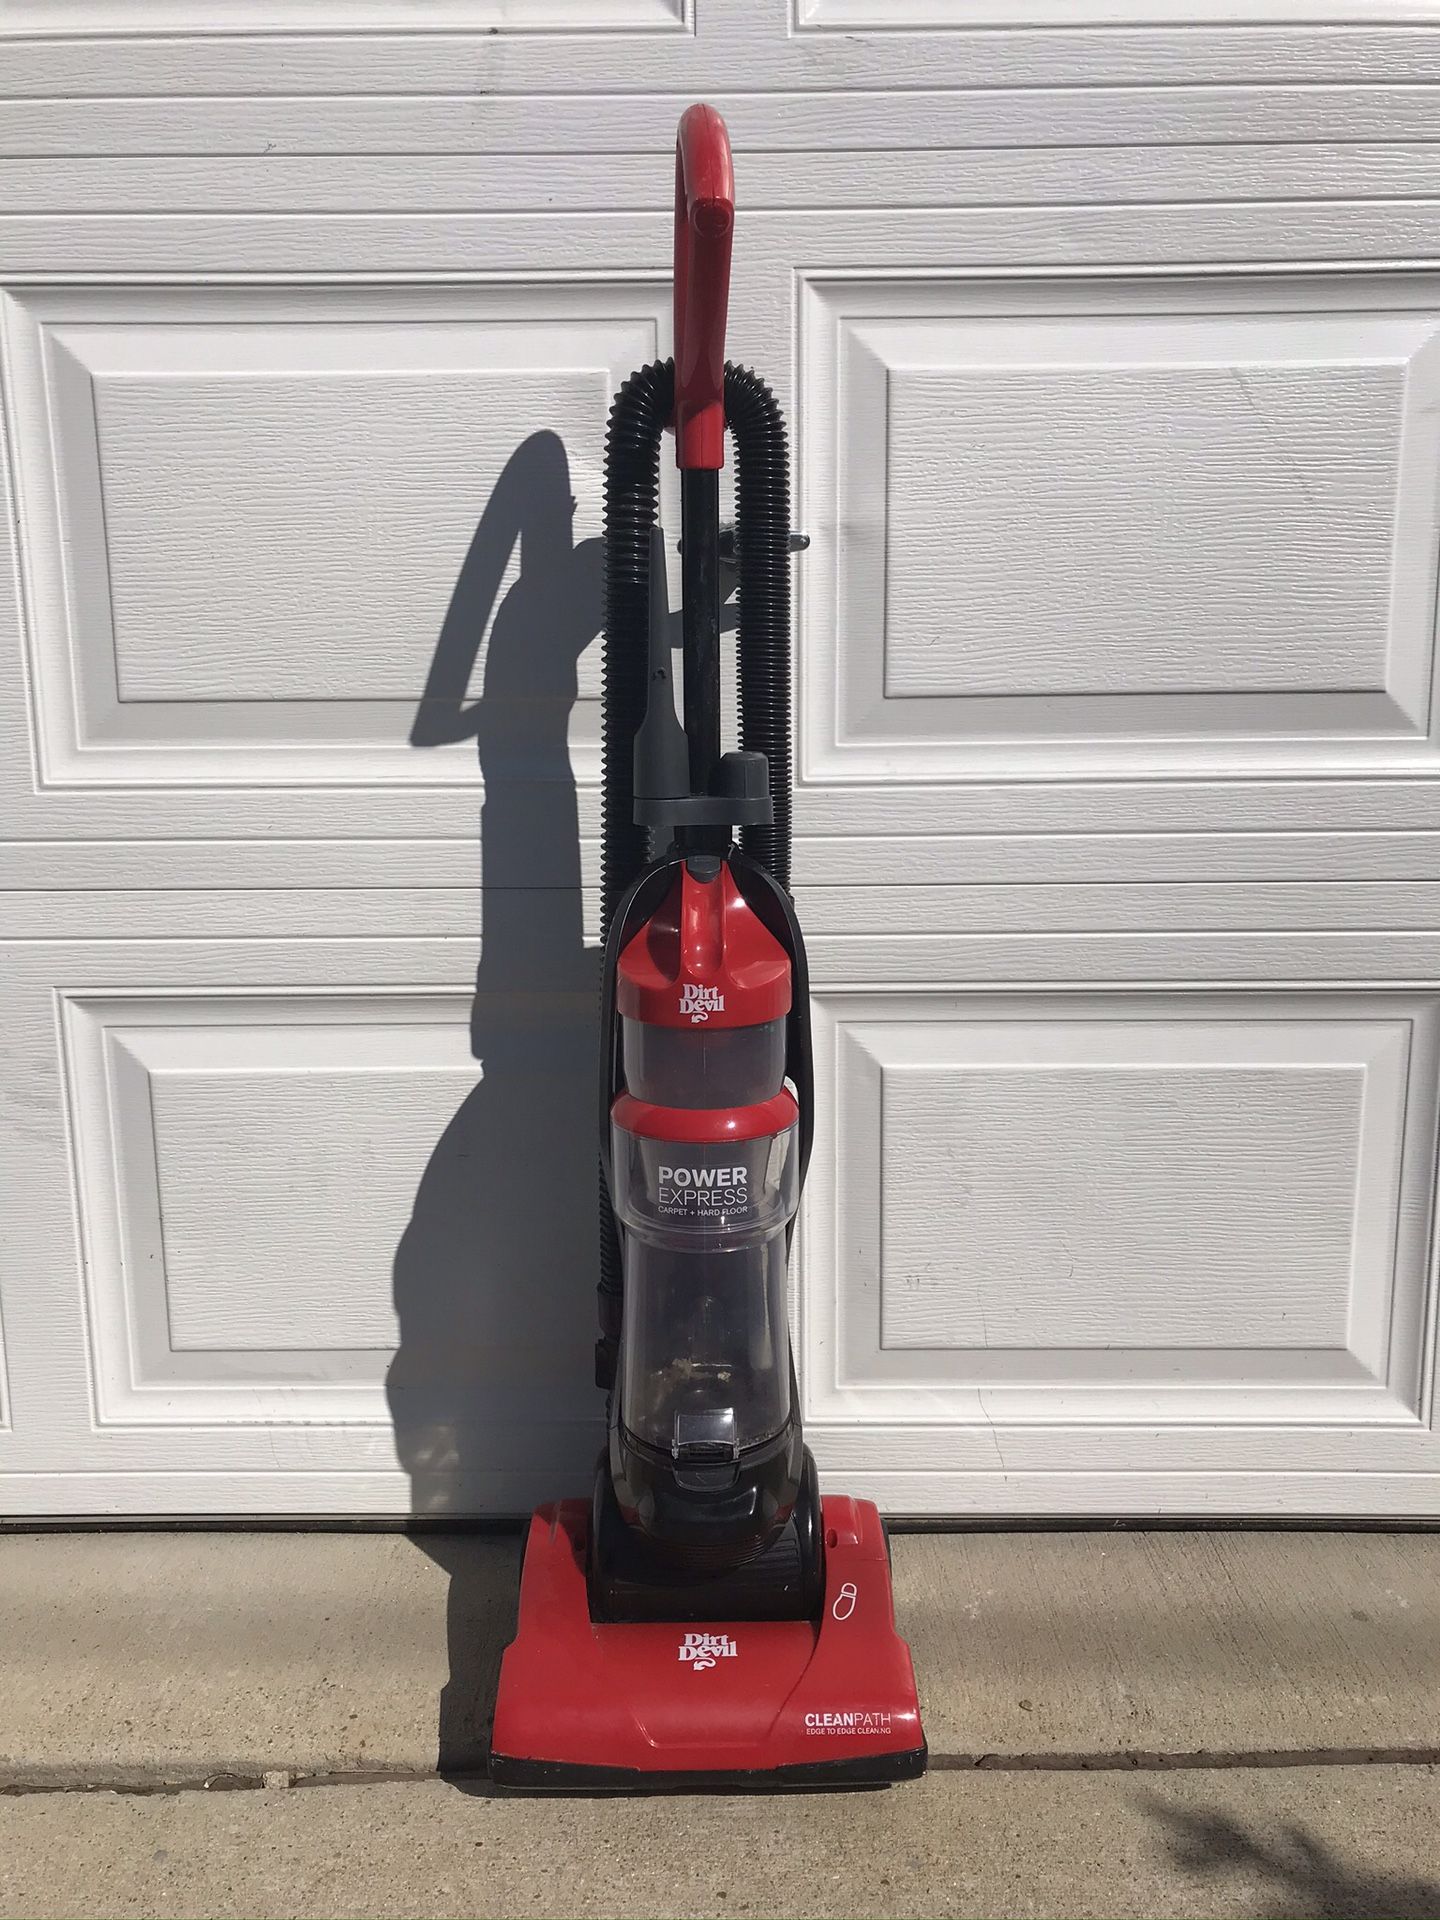 Bagless Dirt Devil Power Express Vacuum Cleaner for carpet and floor, clean and ready to go